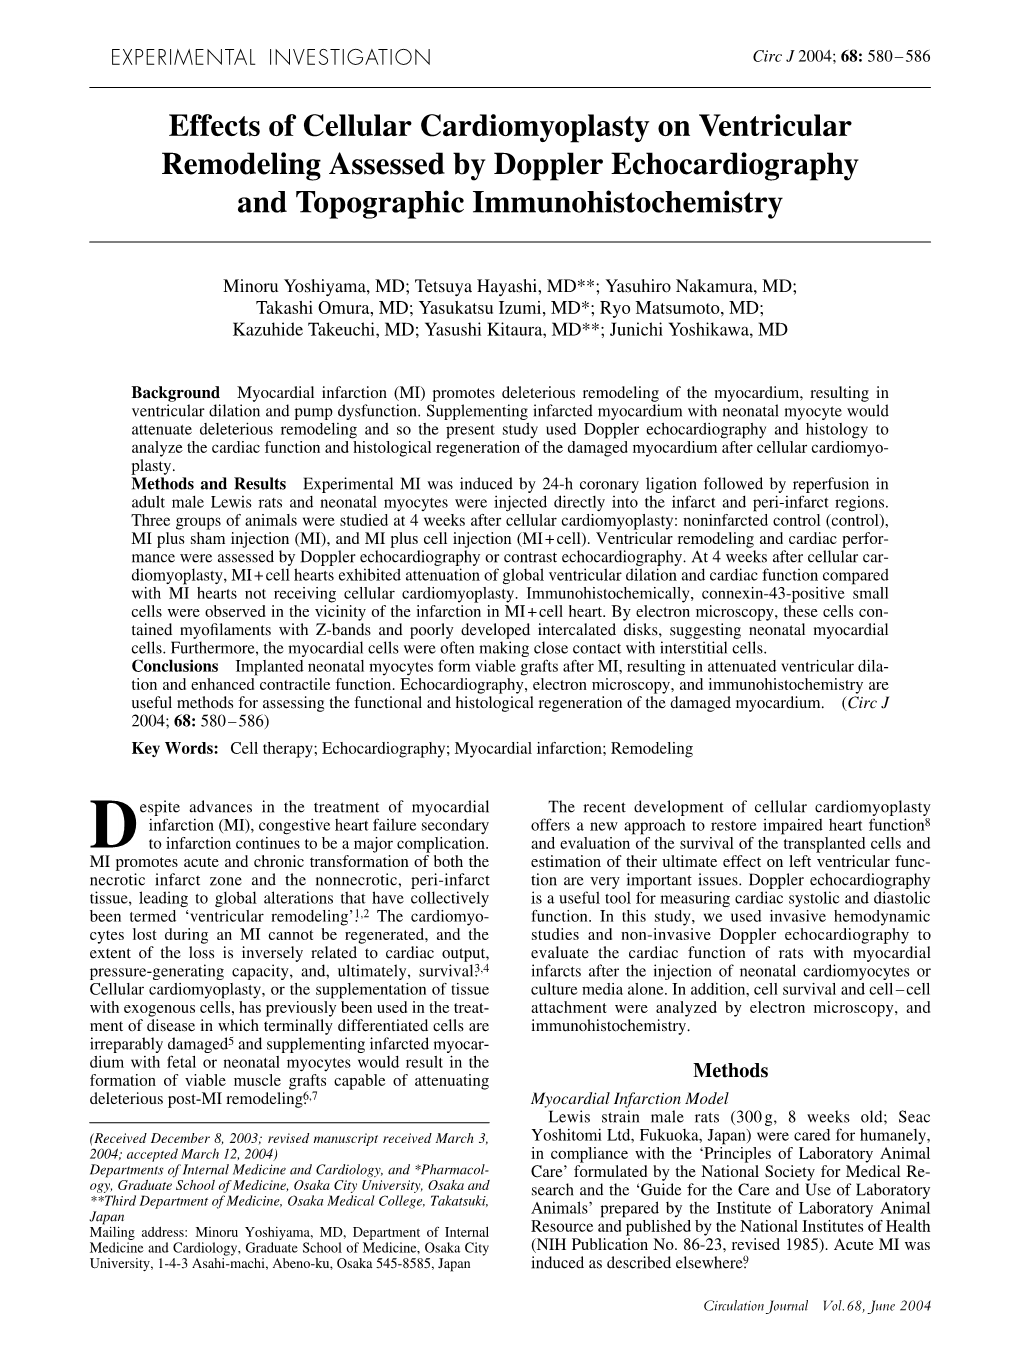 Effects of Cellular Cardiomyoplasty on Ventricular Remodeling Assessed by Doppler Echocardiography and Topographic Immunohistochemistry